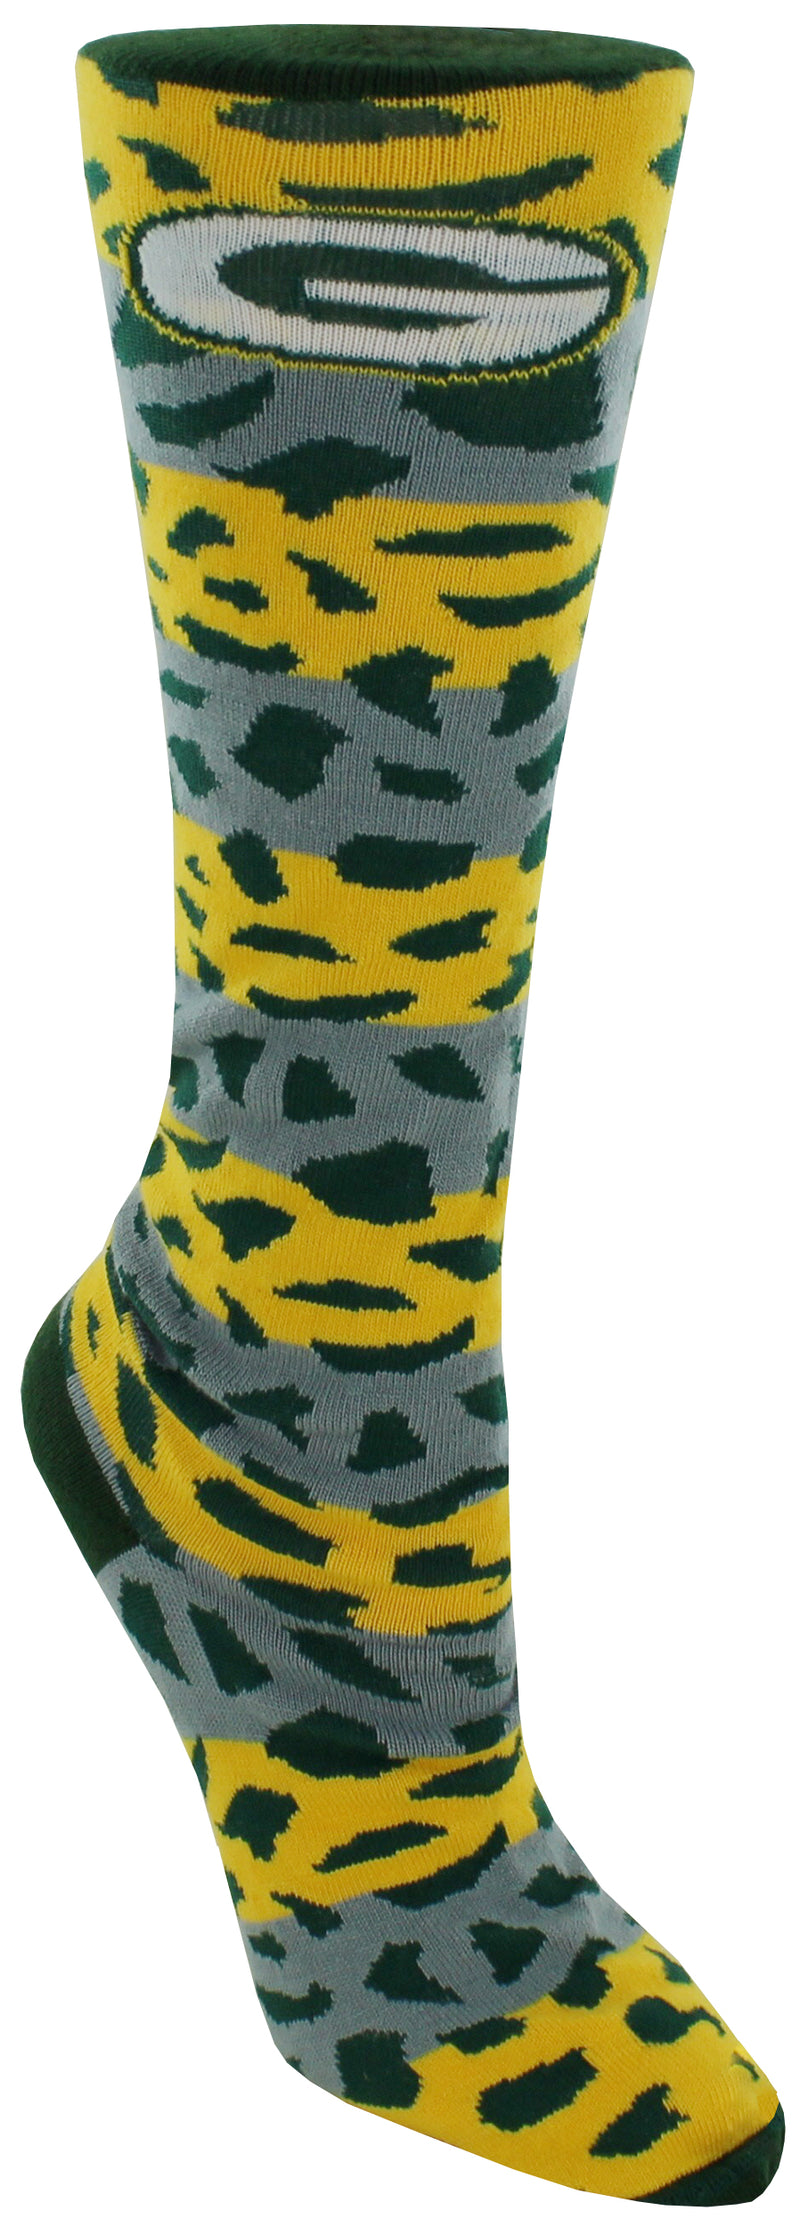 for,bare,feet,fbf,originals,green bay packers,pattern,medley,socks,footwear,shoes,slippers,clothing accessories